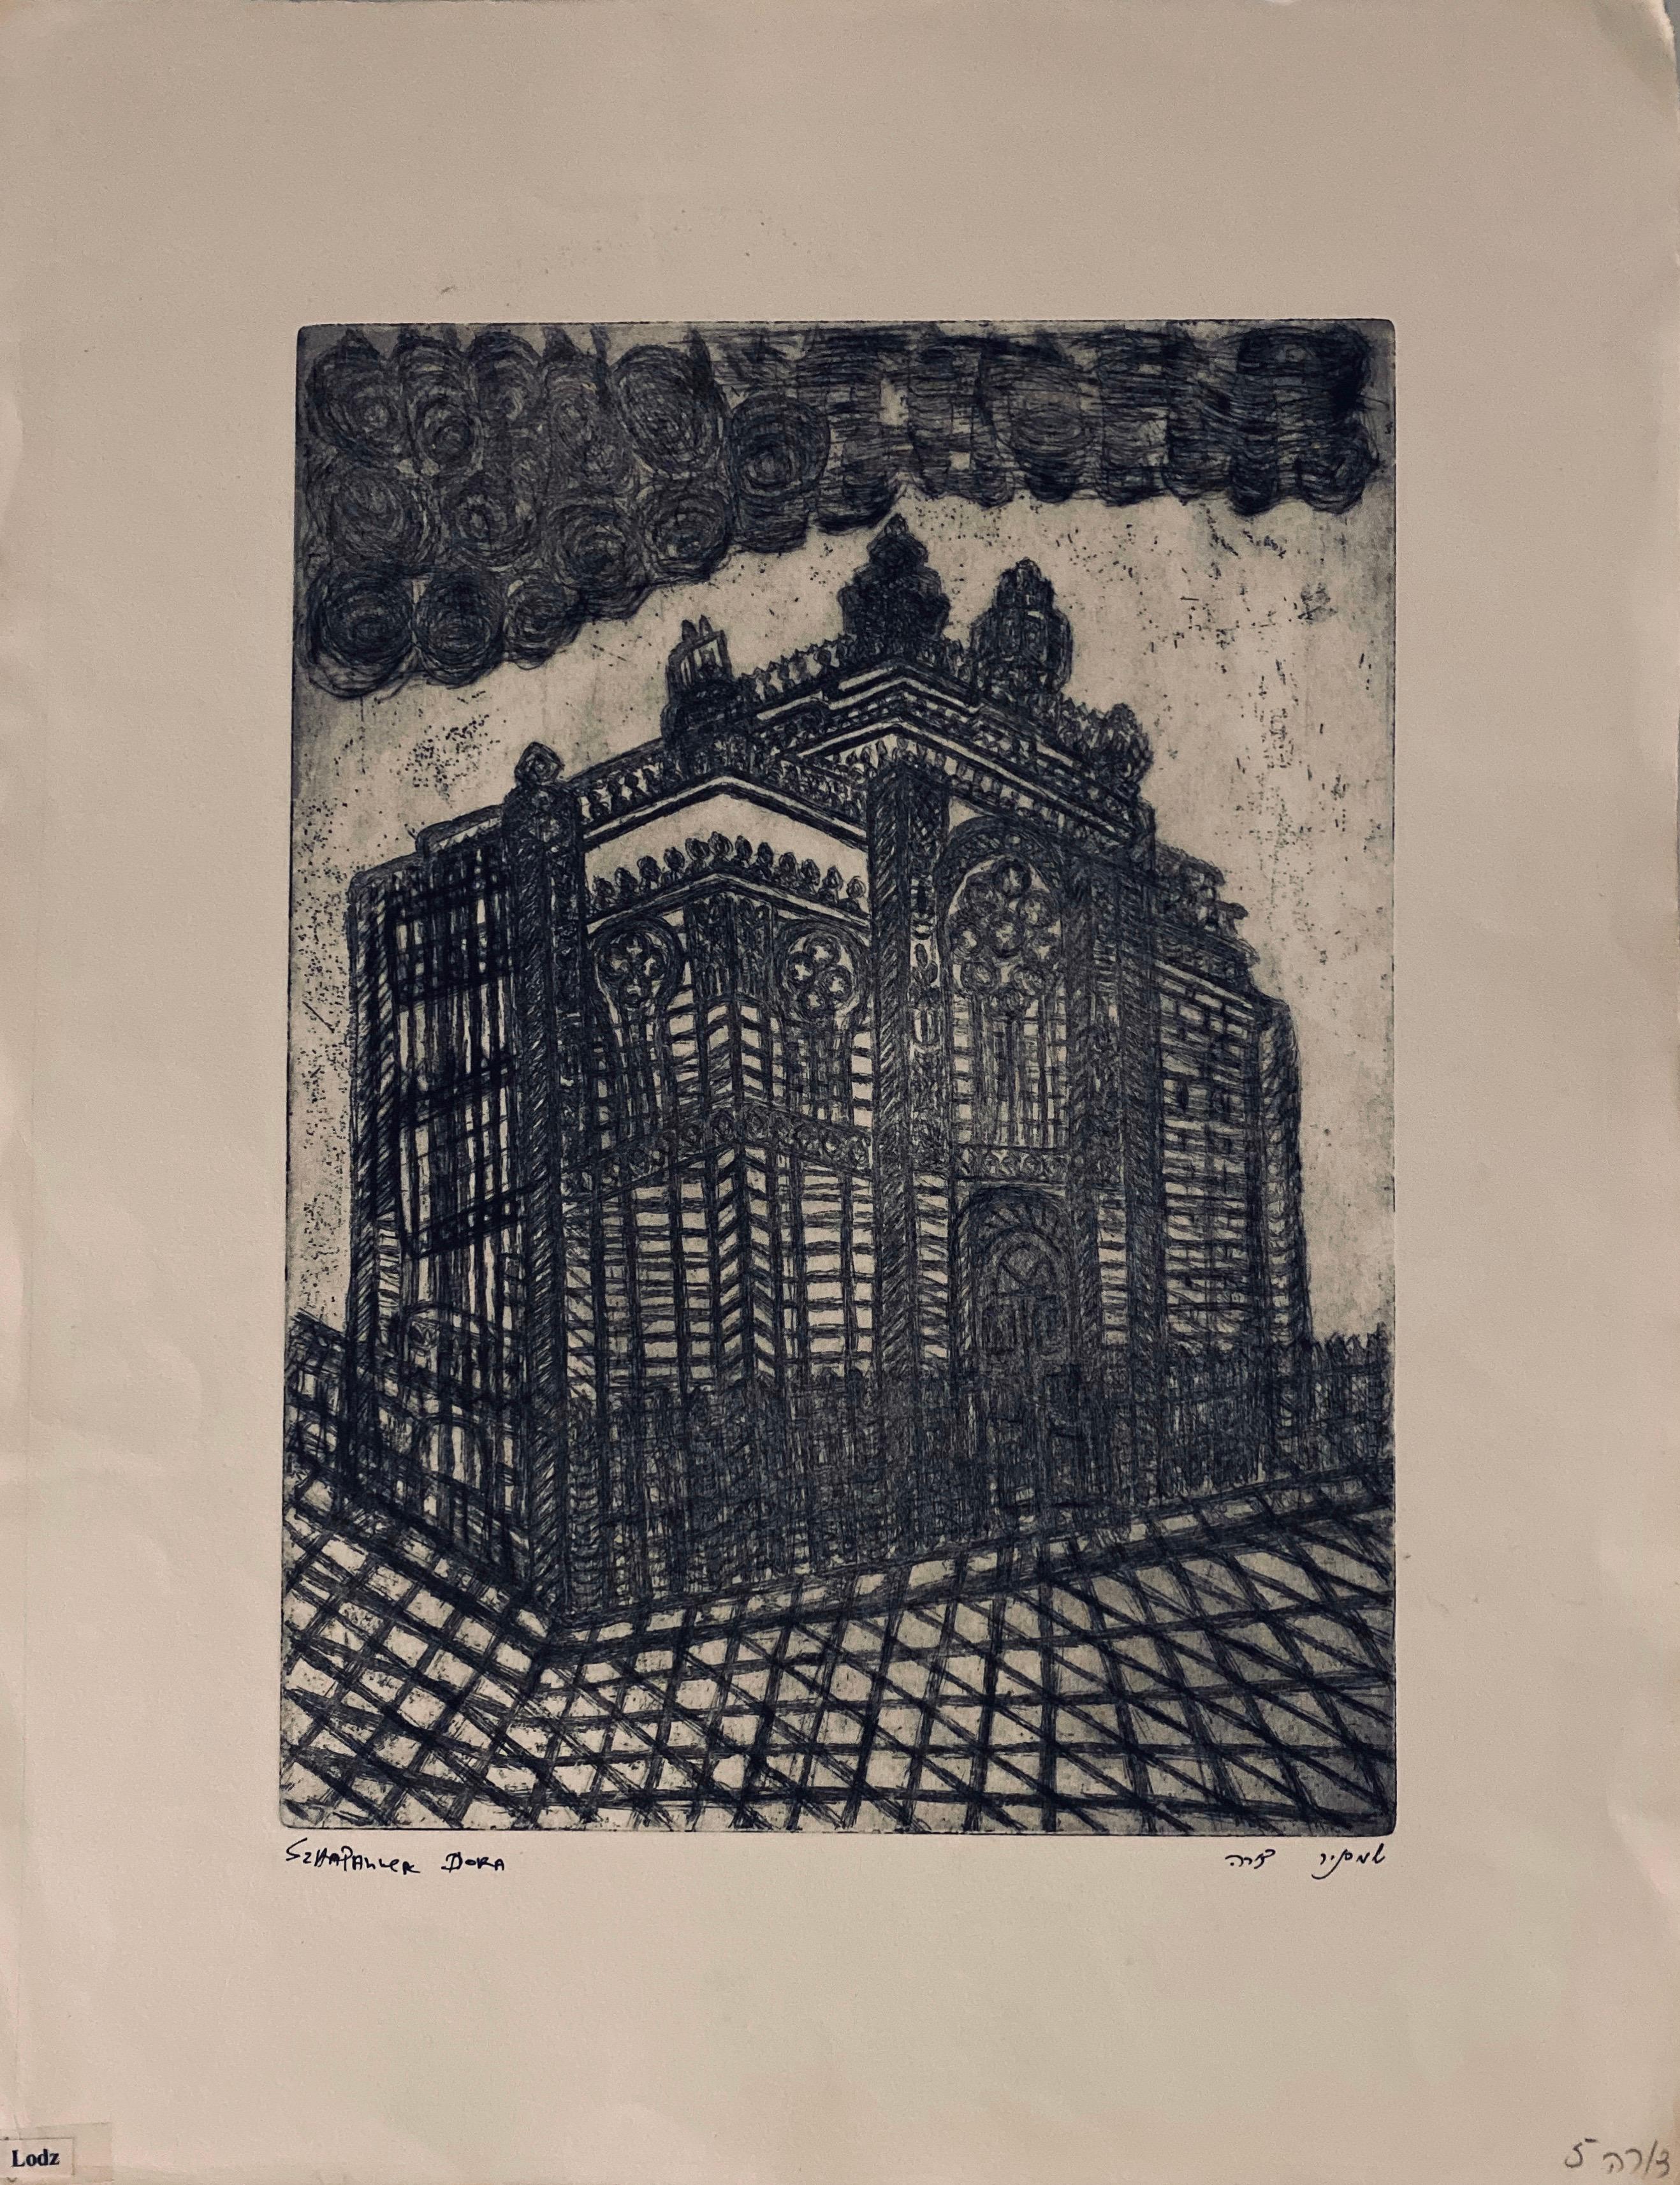 Etching of destroyed synagogue - Lodz, Poland 